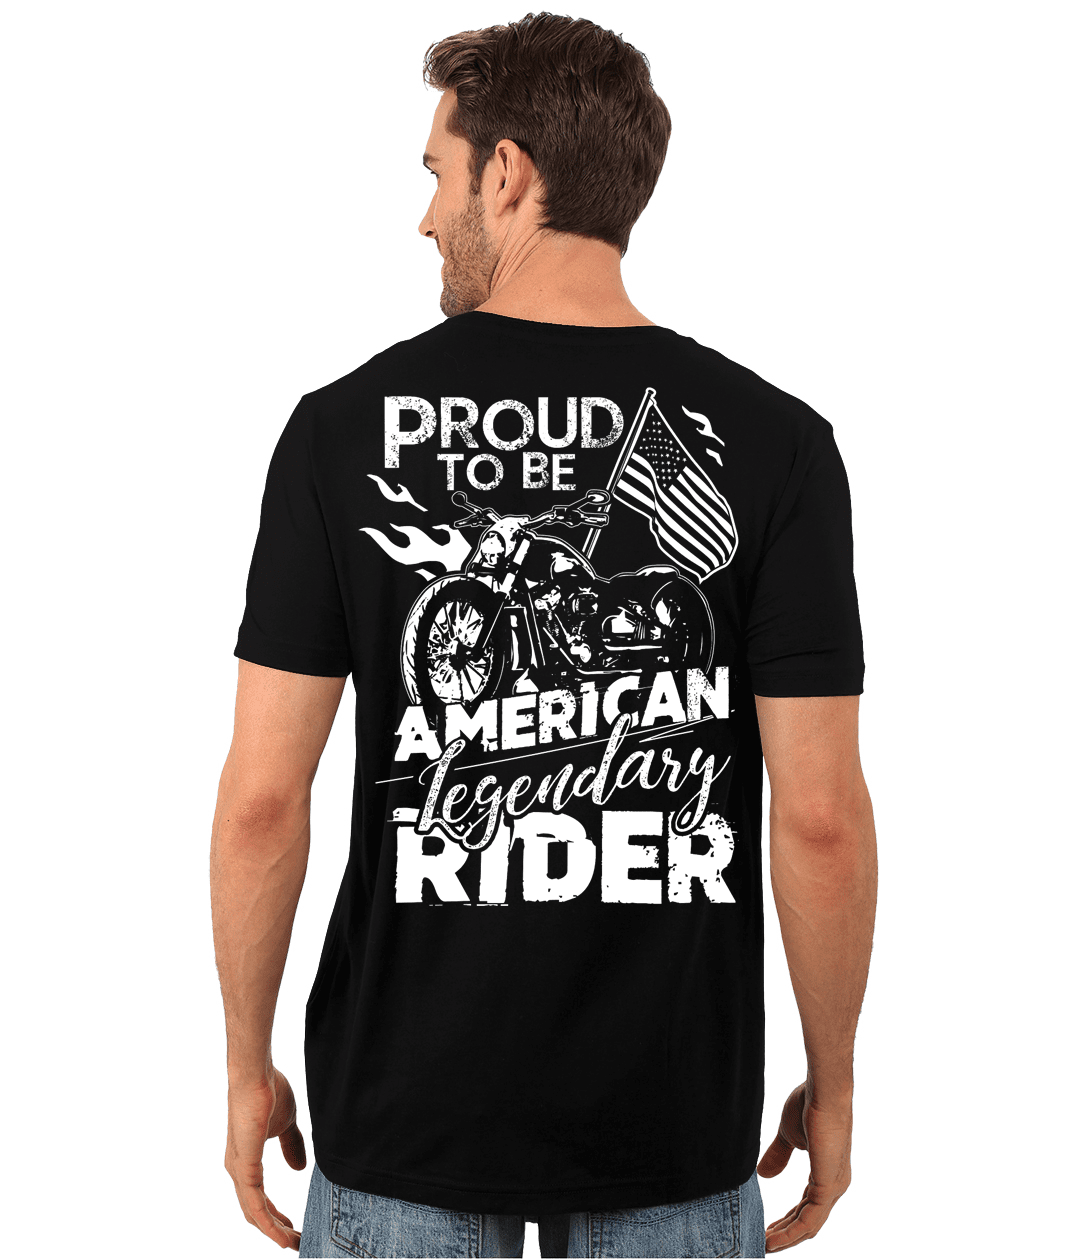 Proud to be American Legendary Rider T-Shirt